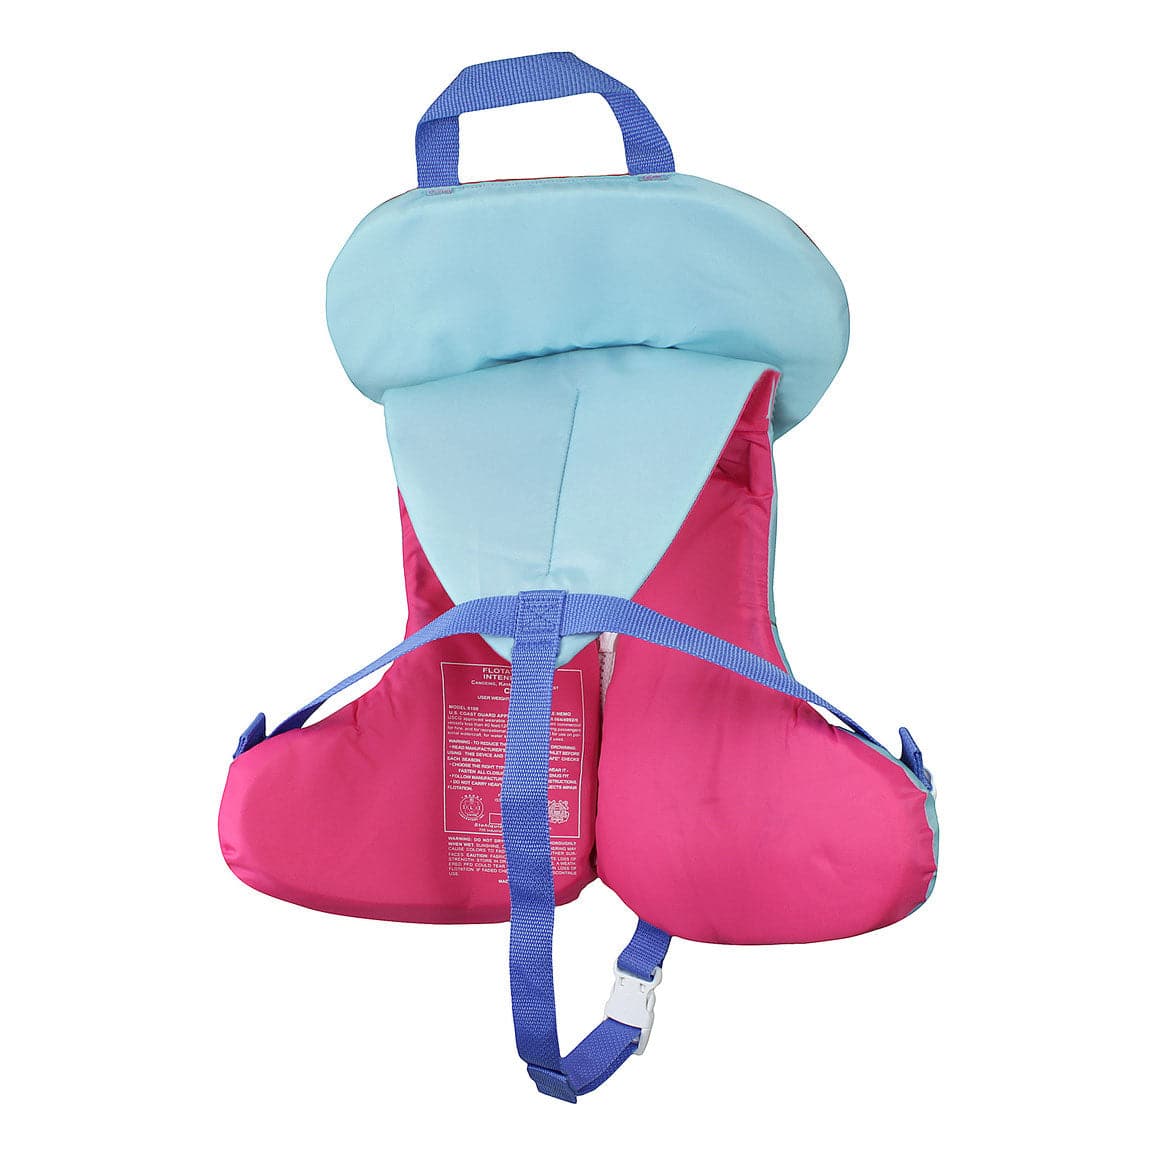 Featuring the Infant & Child PFDs kid's pfd manufactured by Stohlquist shown here from a third angle.